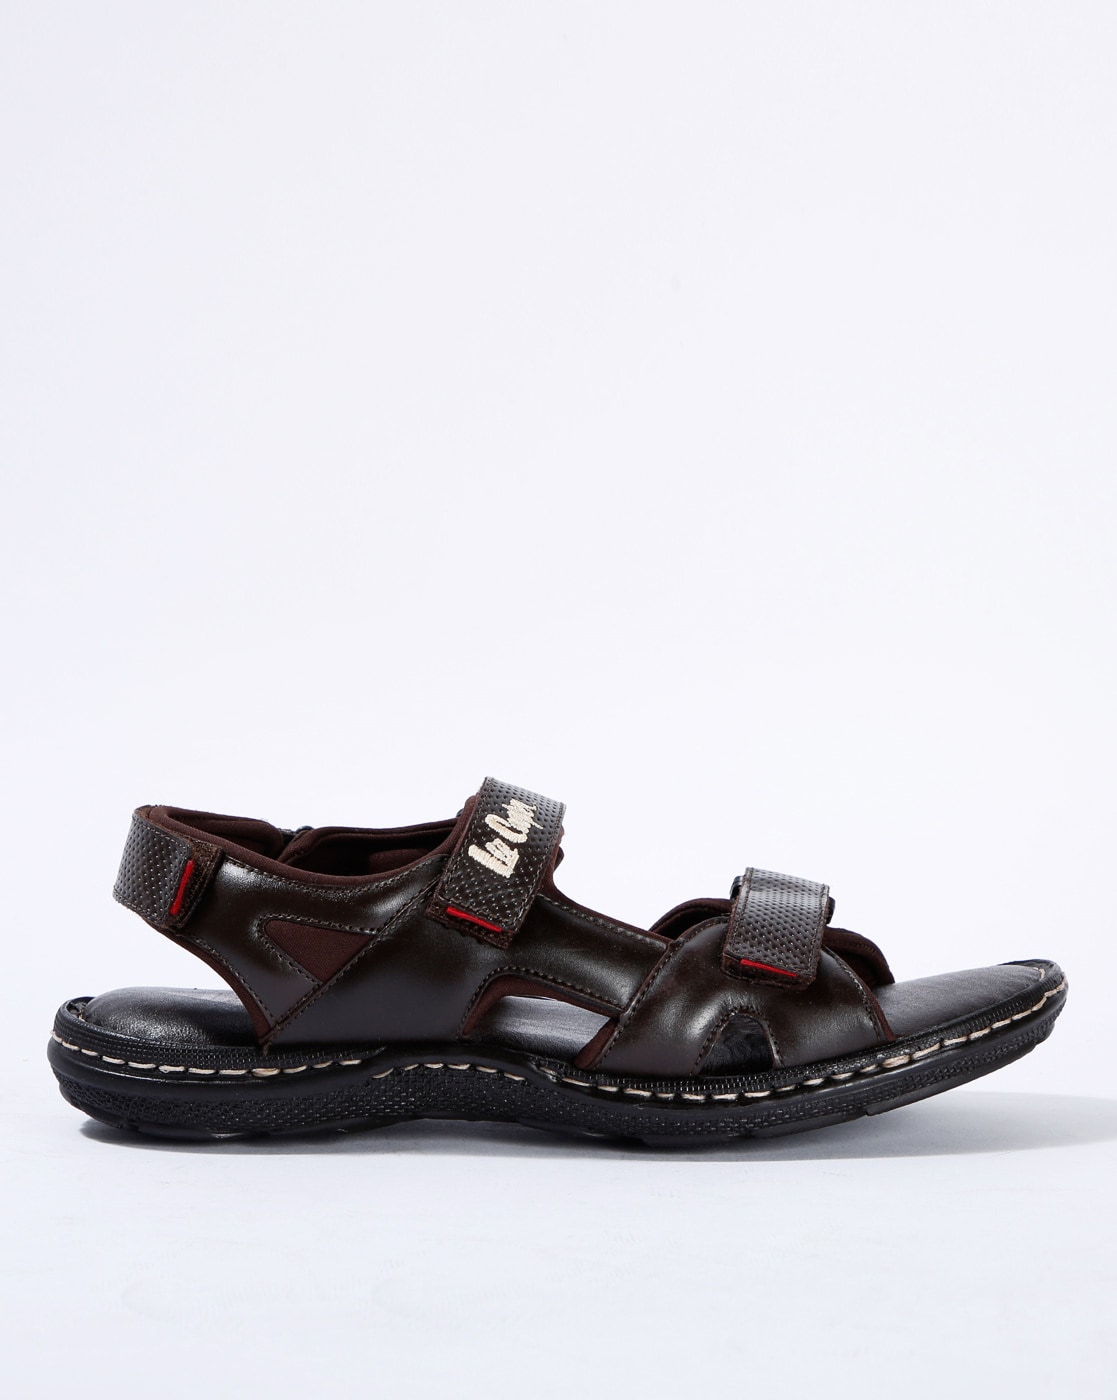 Sports Sandals for Men by Lee Cooper 